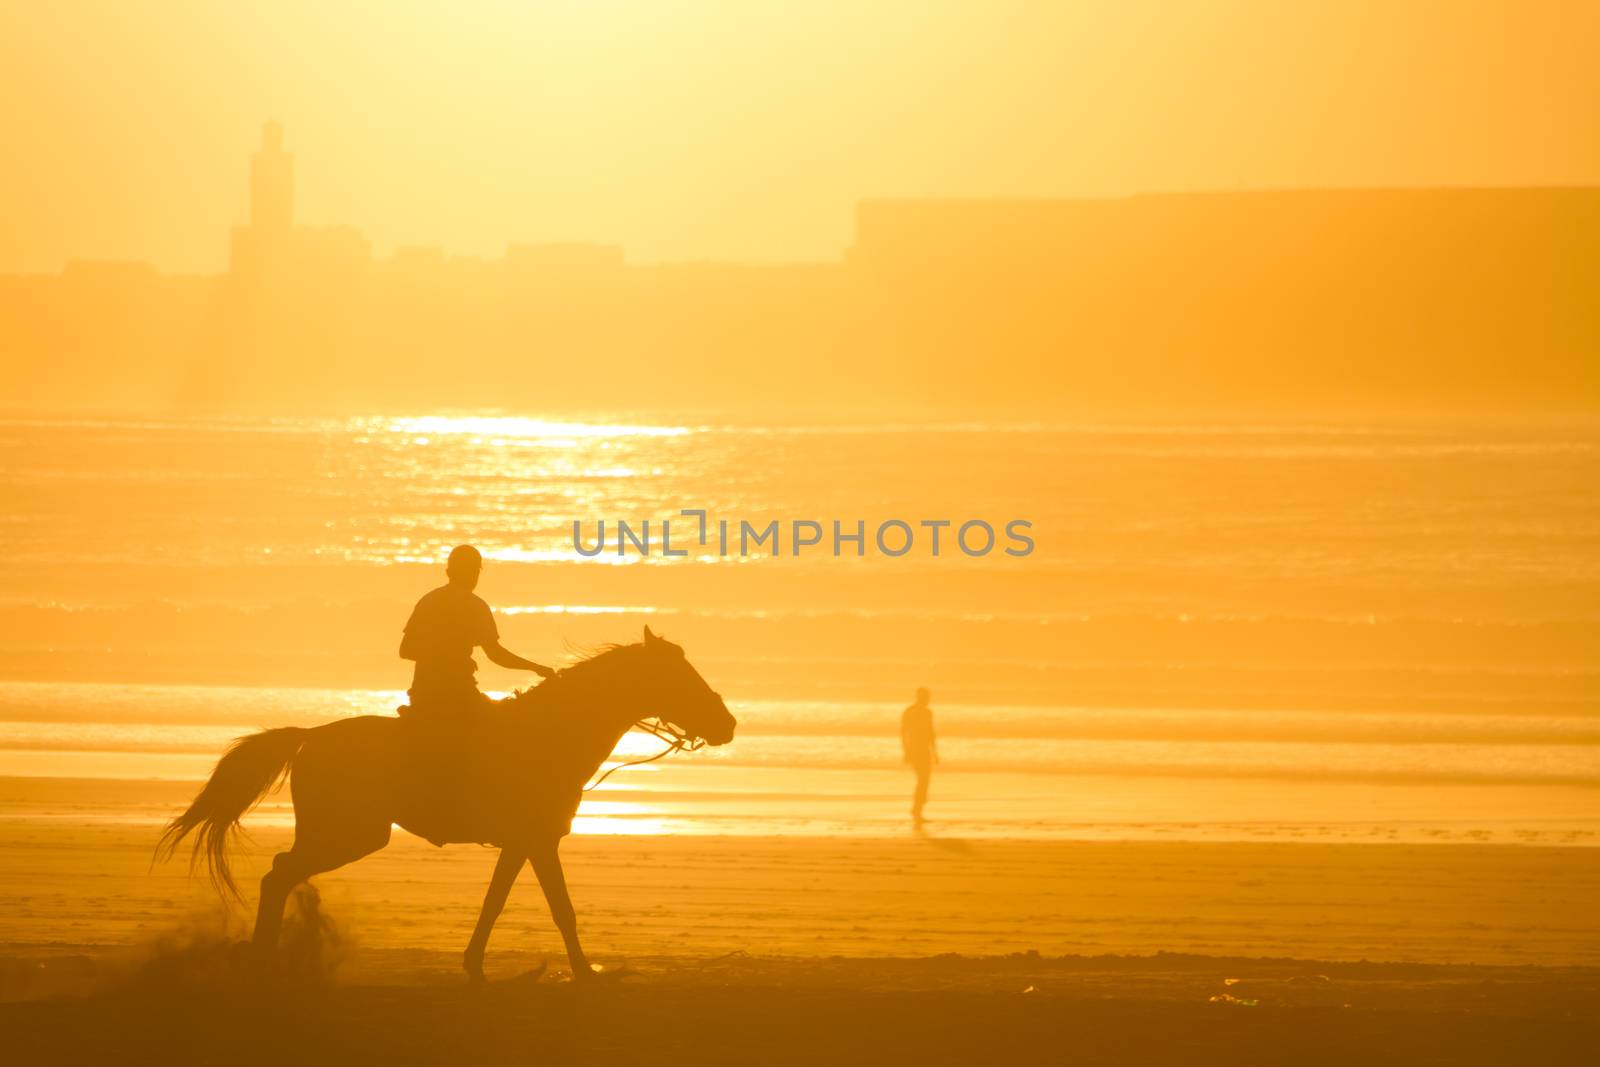 Man riding horse on the beach at sunset.